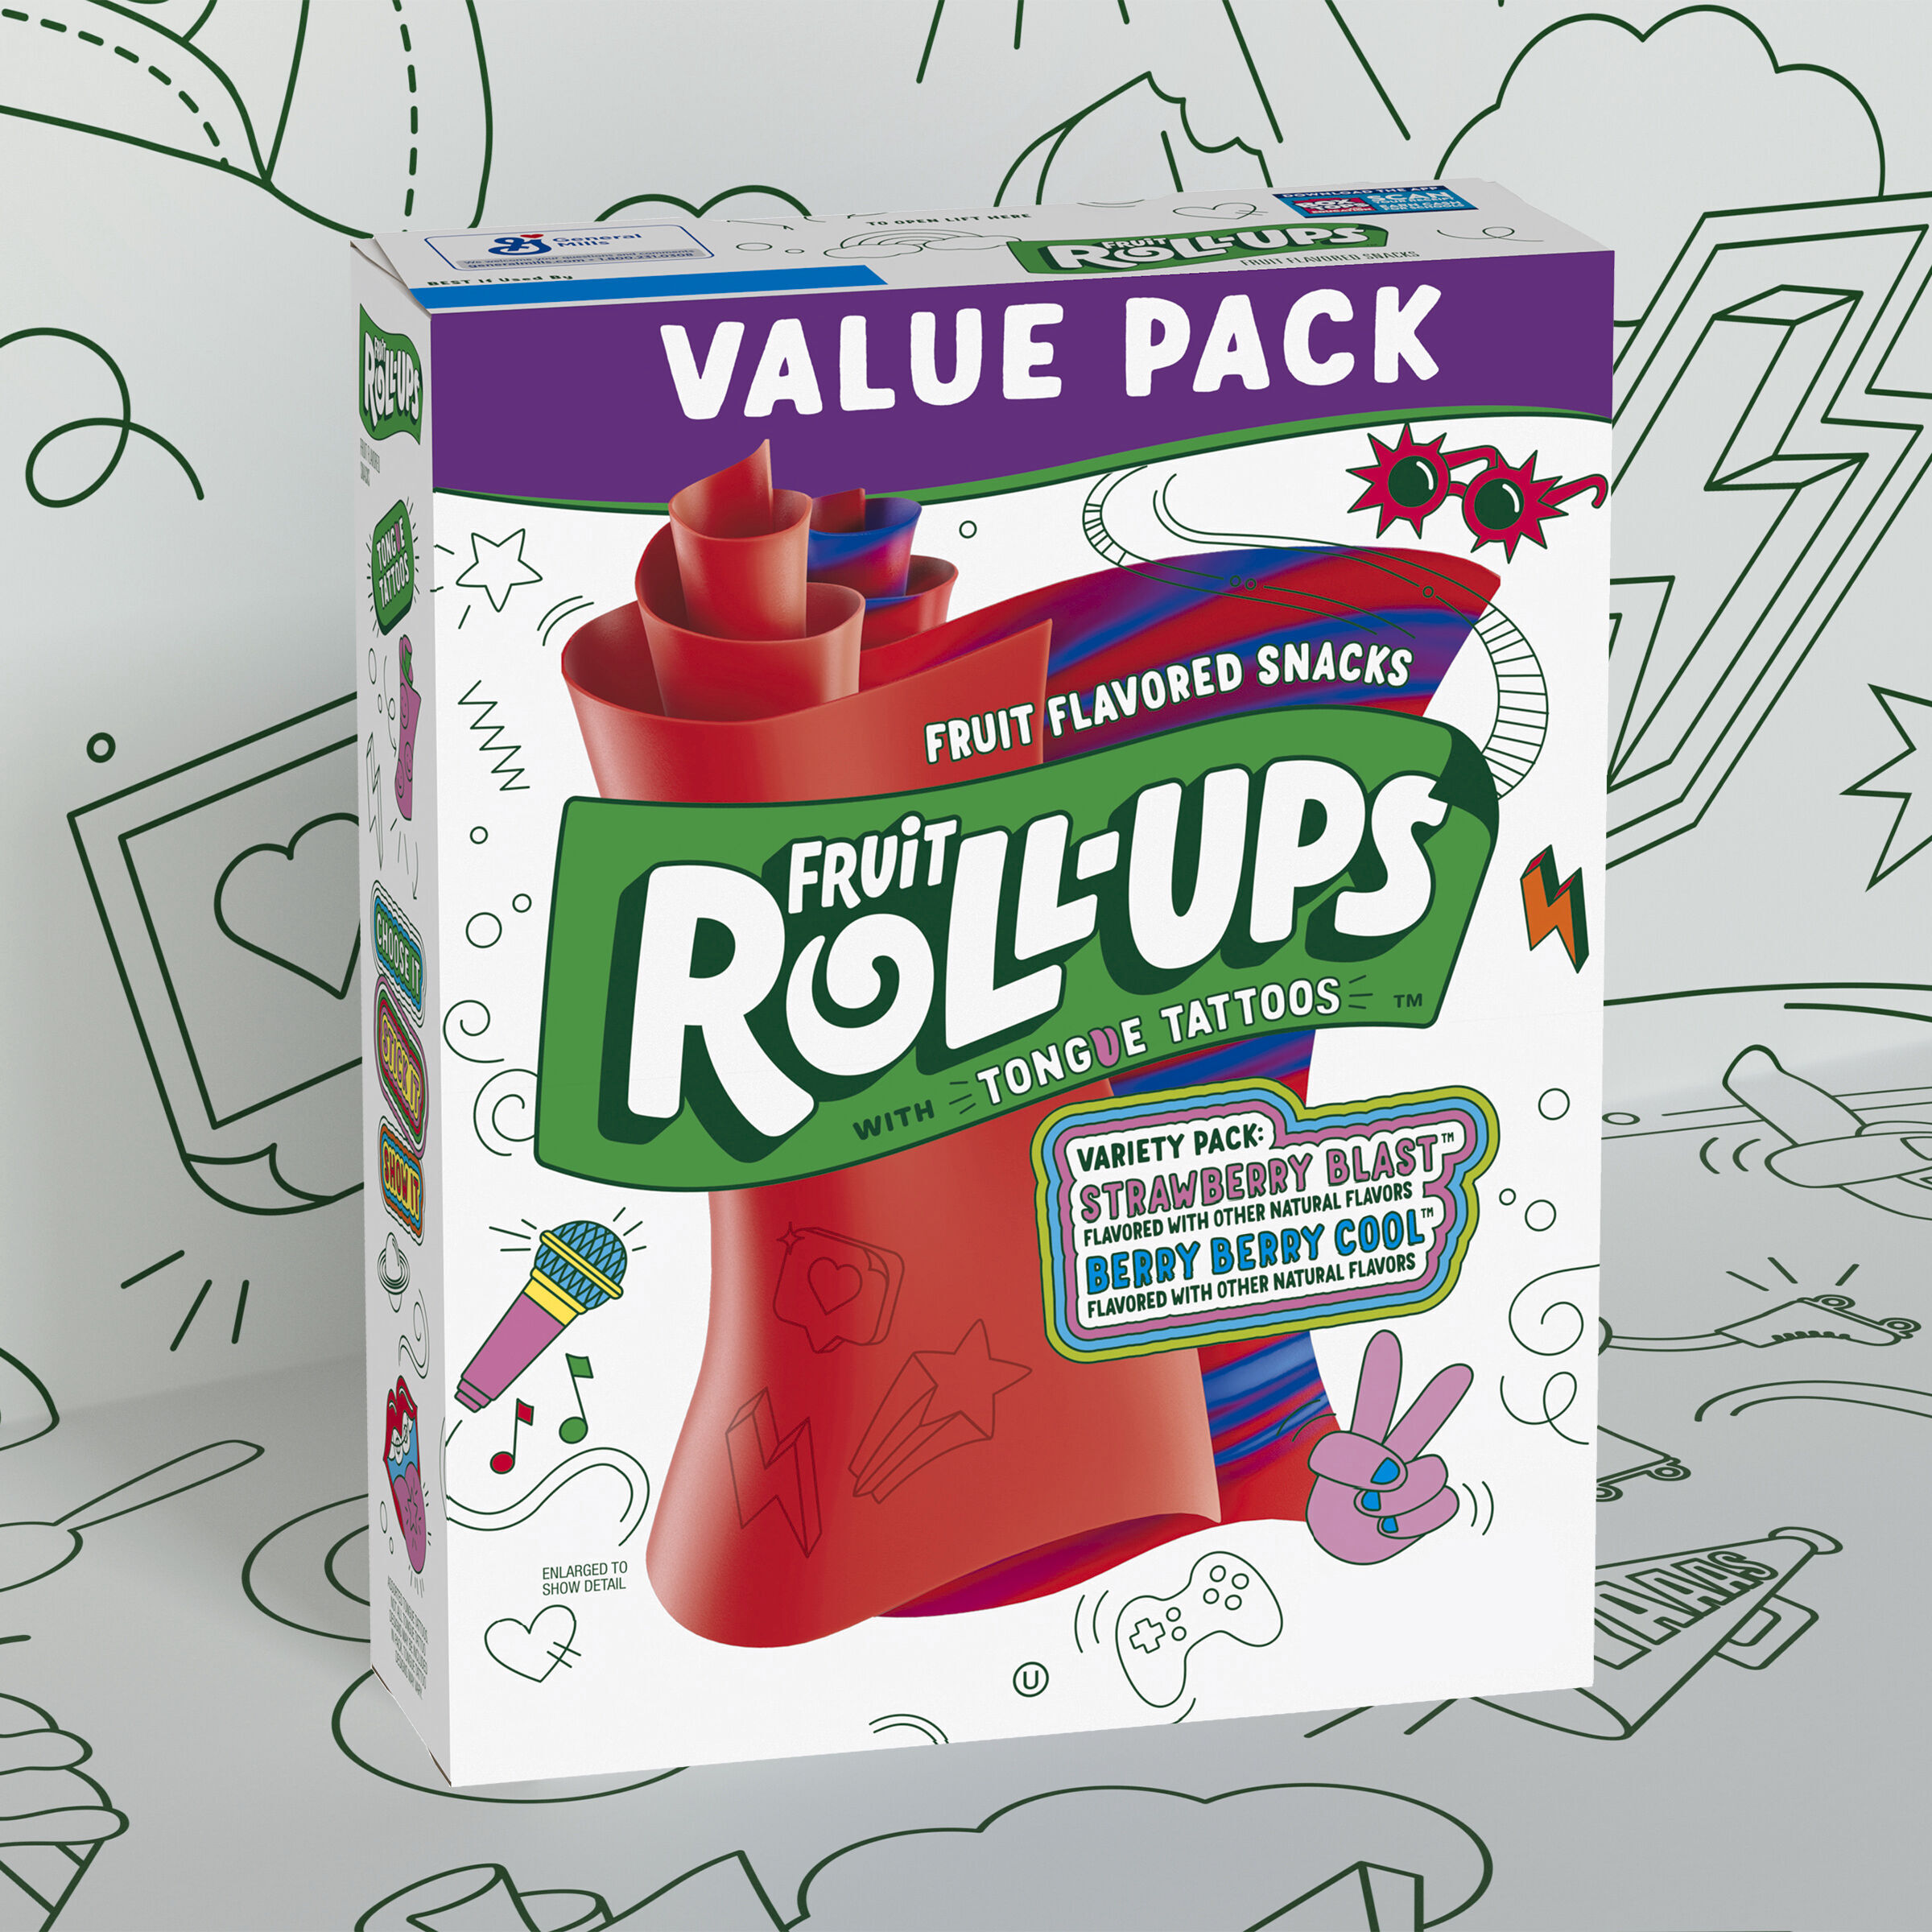 Fruit Roll-Ups Fruit Flavored Snacks, Variety Value Pack, 0.5 oz, 20 ct - image 3 of 9